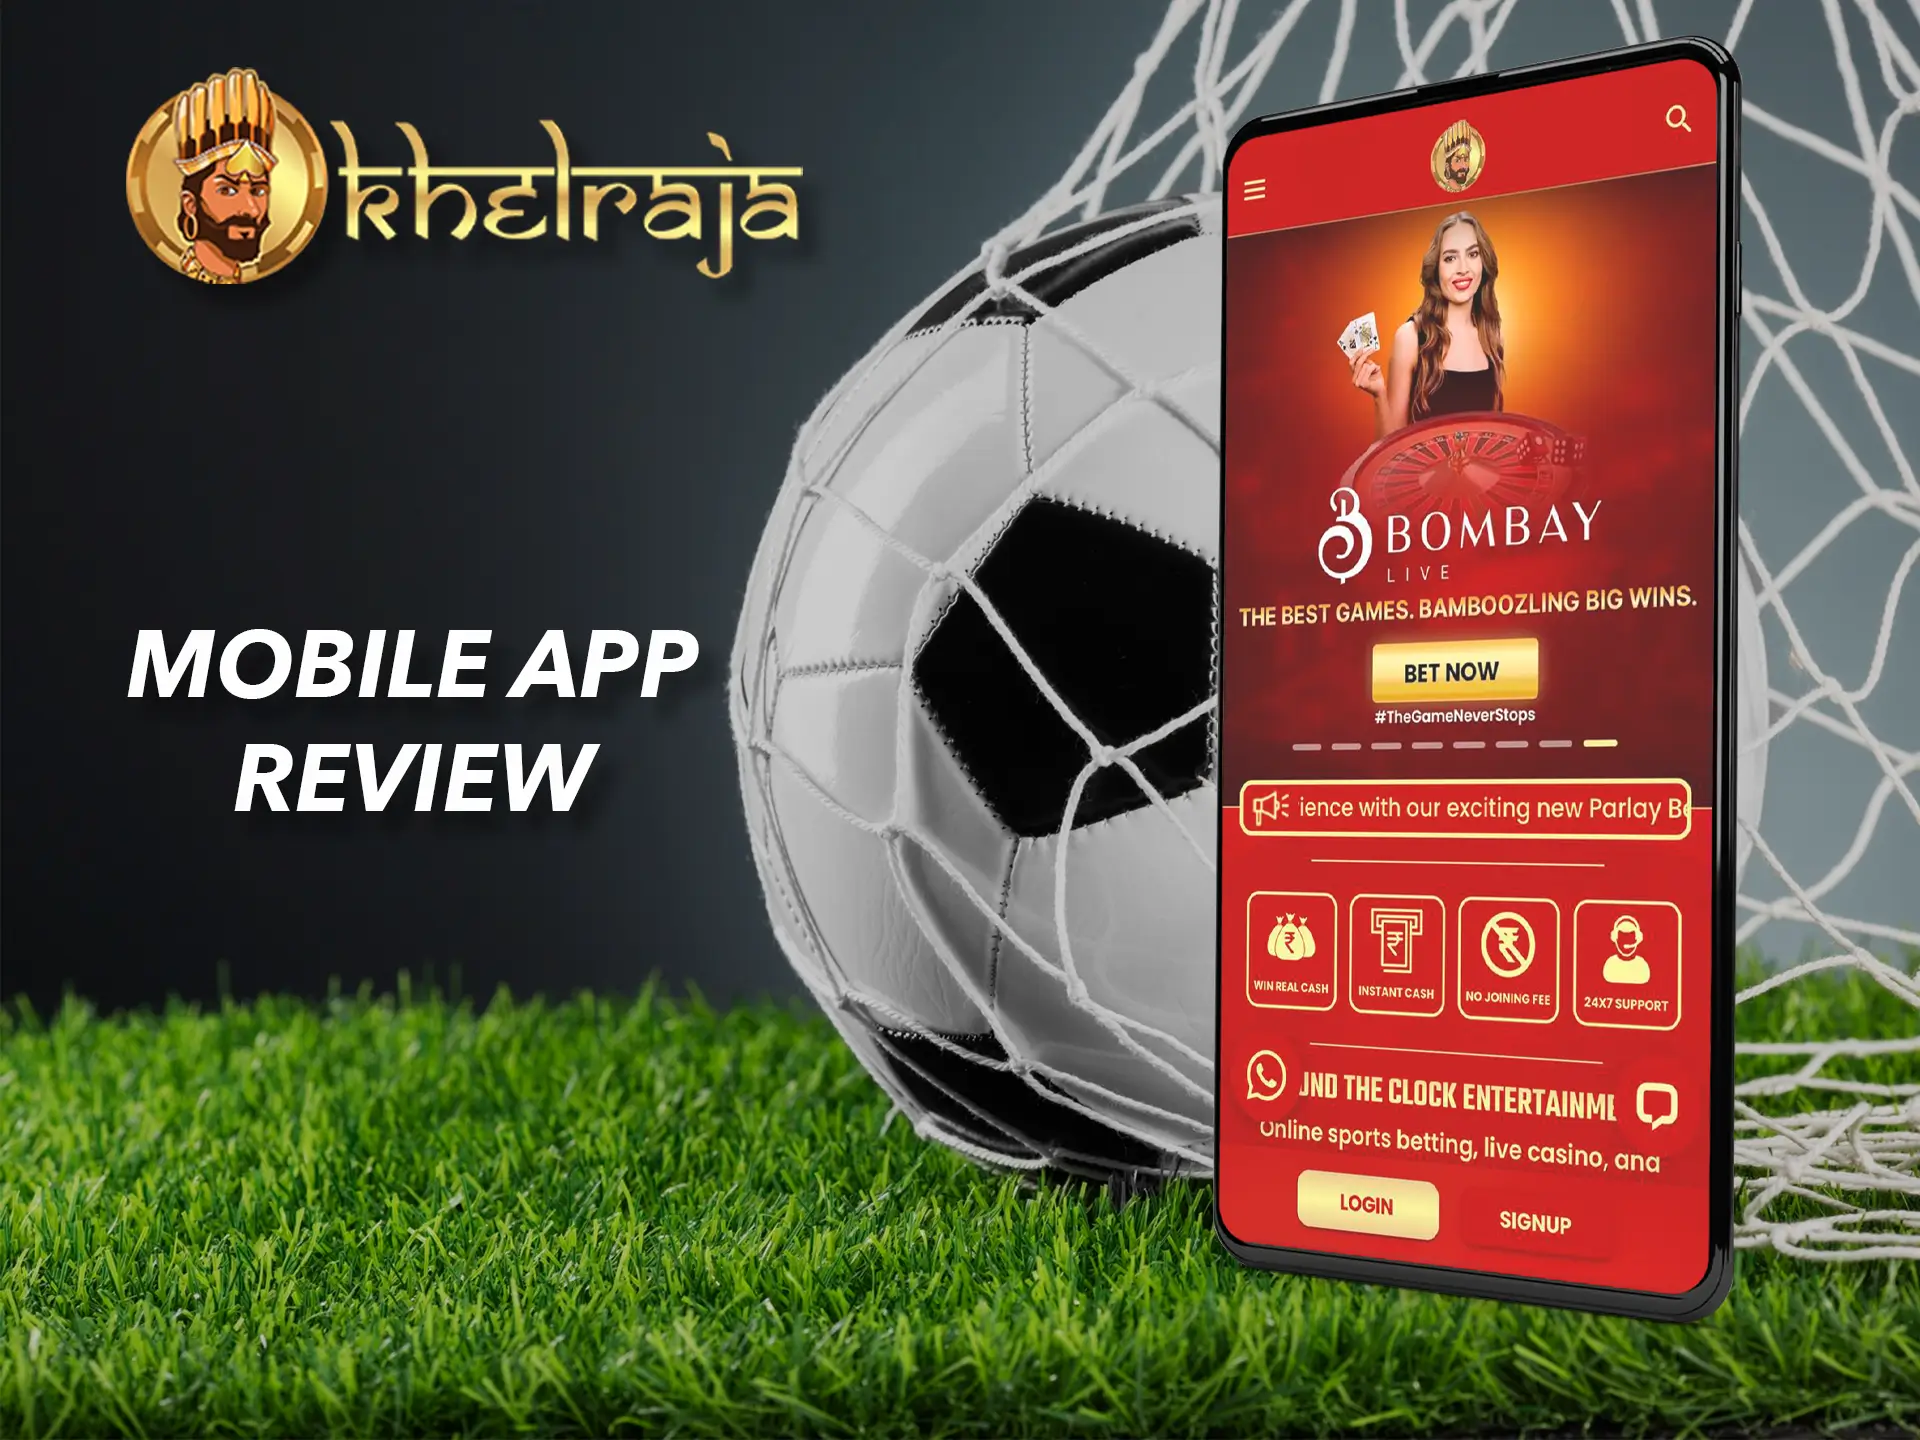 Get yourself a mobile app from Khelraja Casino.